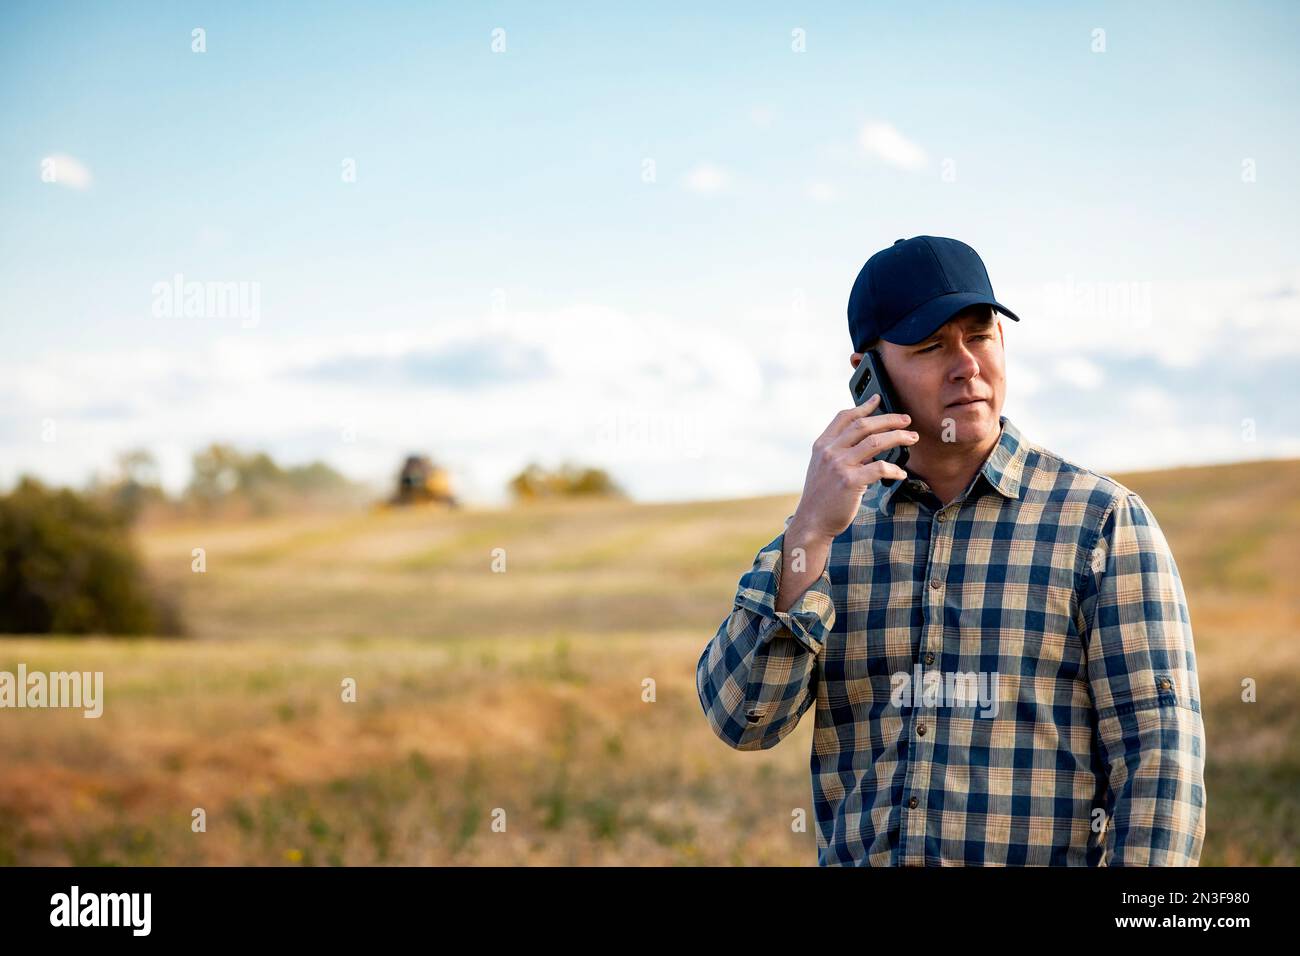 A man standing in a field, talking on a smart phone while monitoring and completing fall canola harvest with a combine in the background Stock Photo